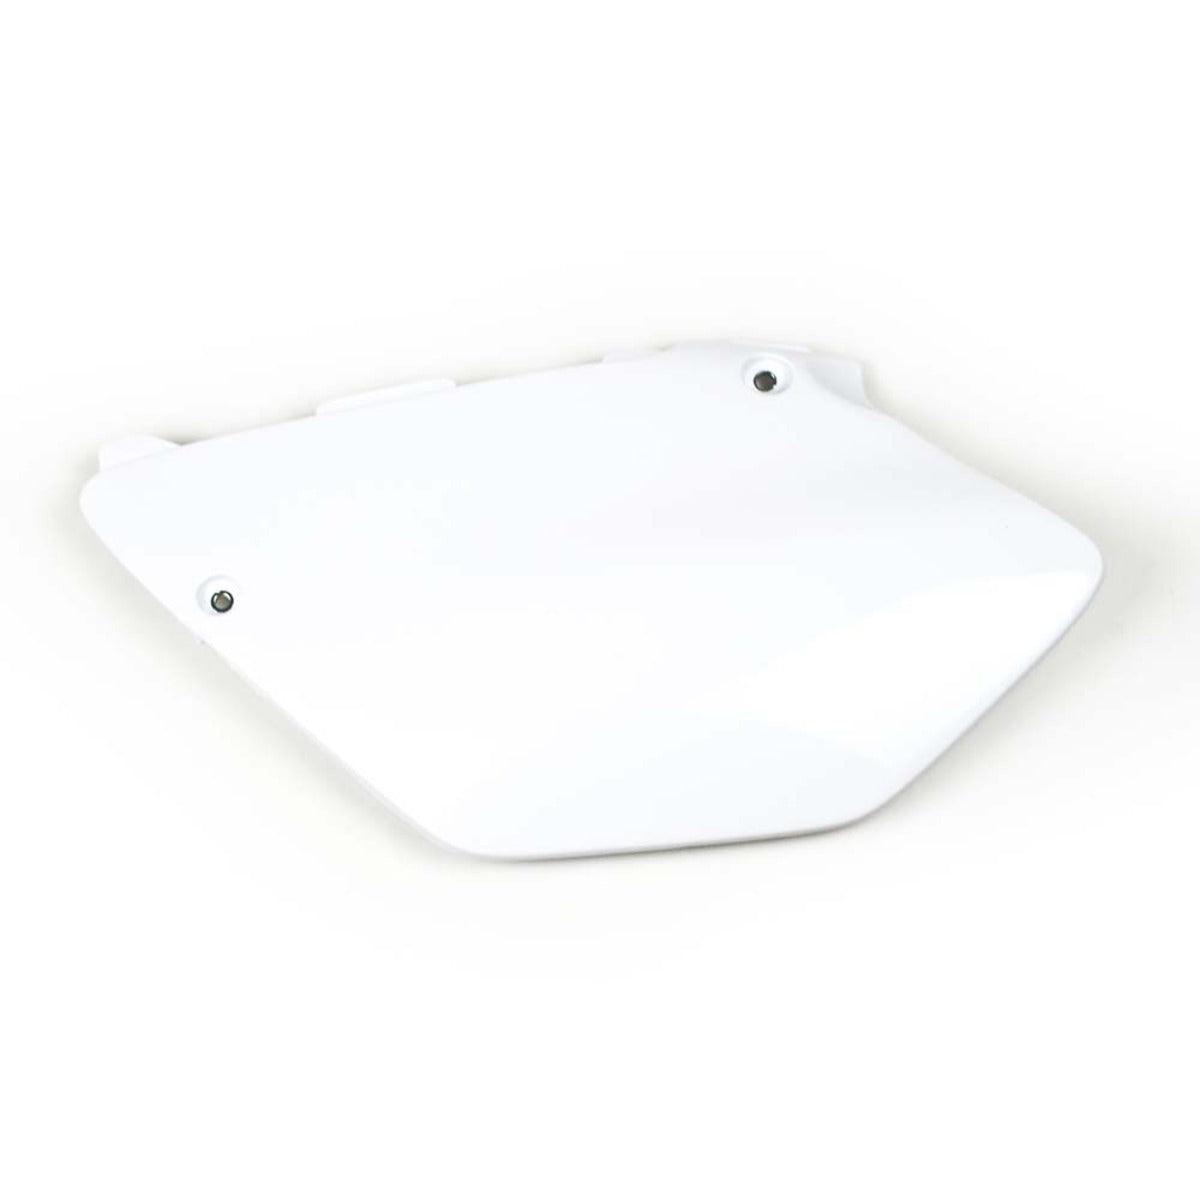 Factory Effex Side Plate Plastic YZ125/250 02-14 (White) - American Legend Rider